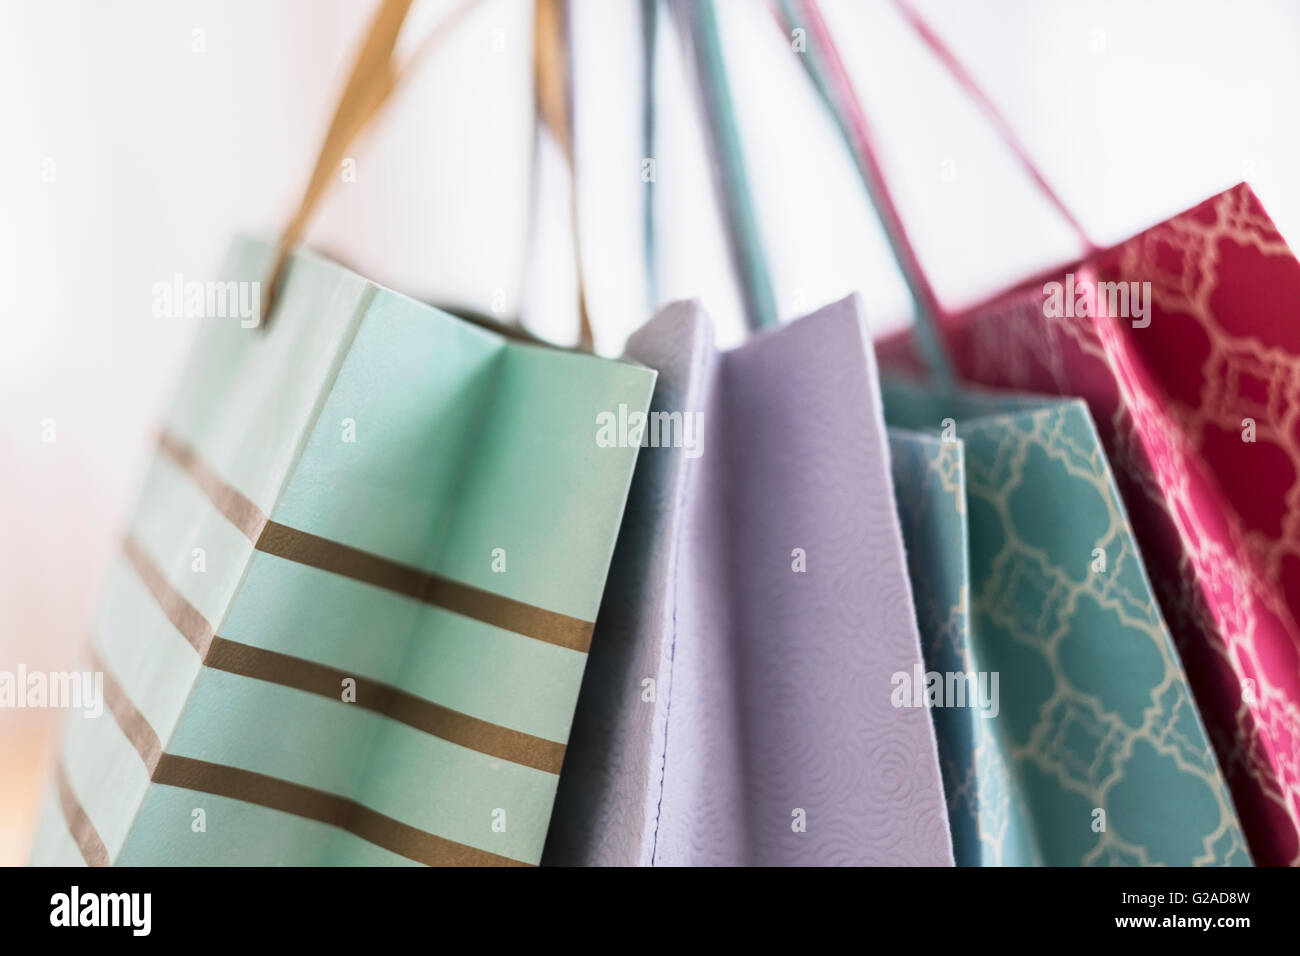 Colorful shopping bags Stock Photo